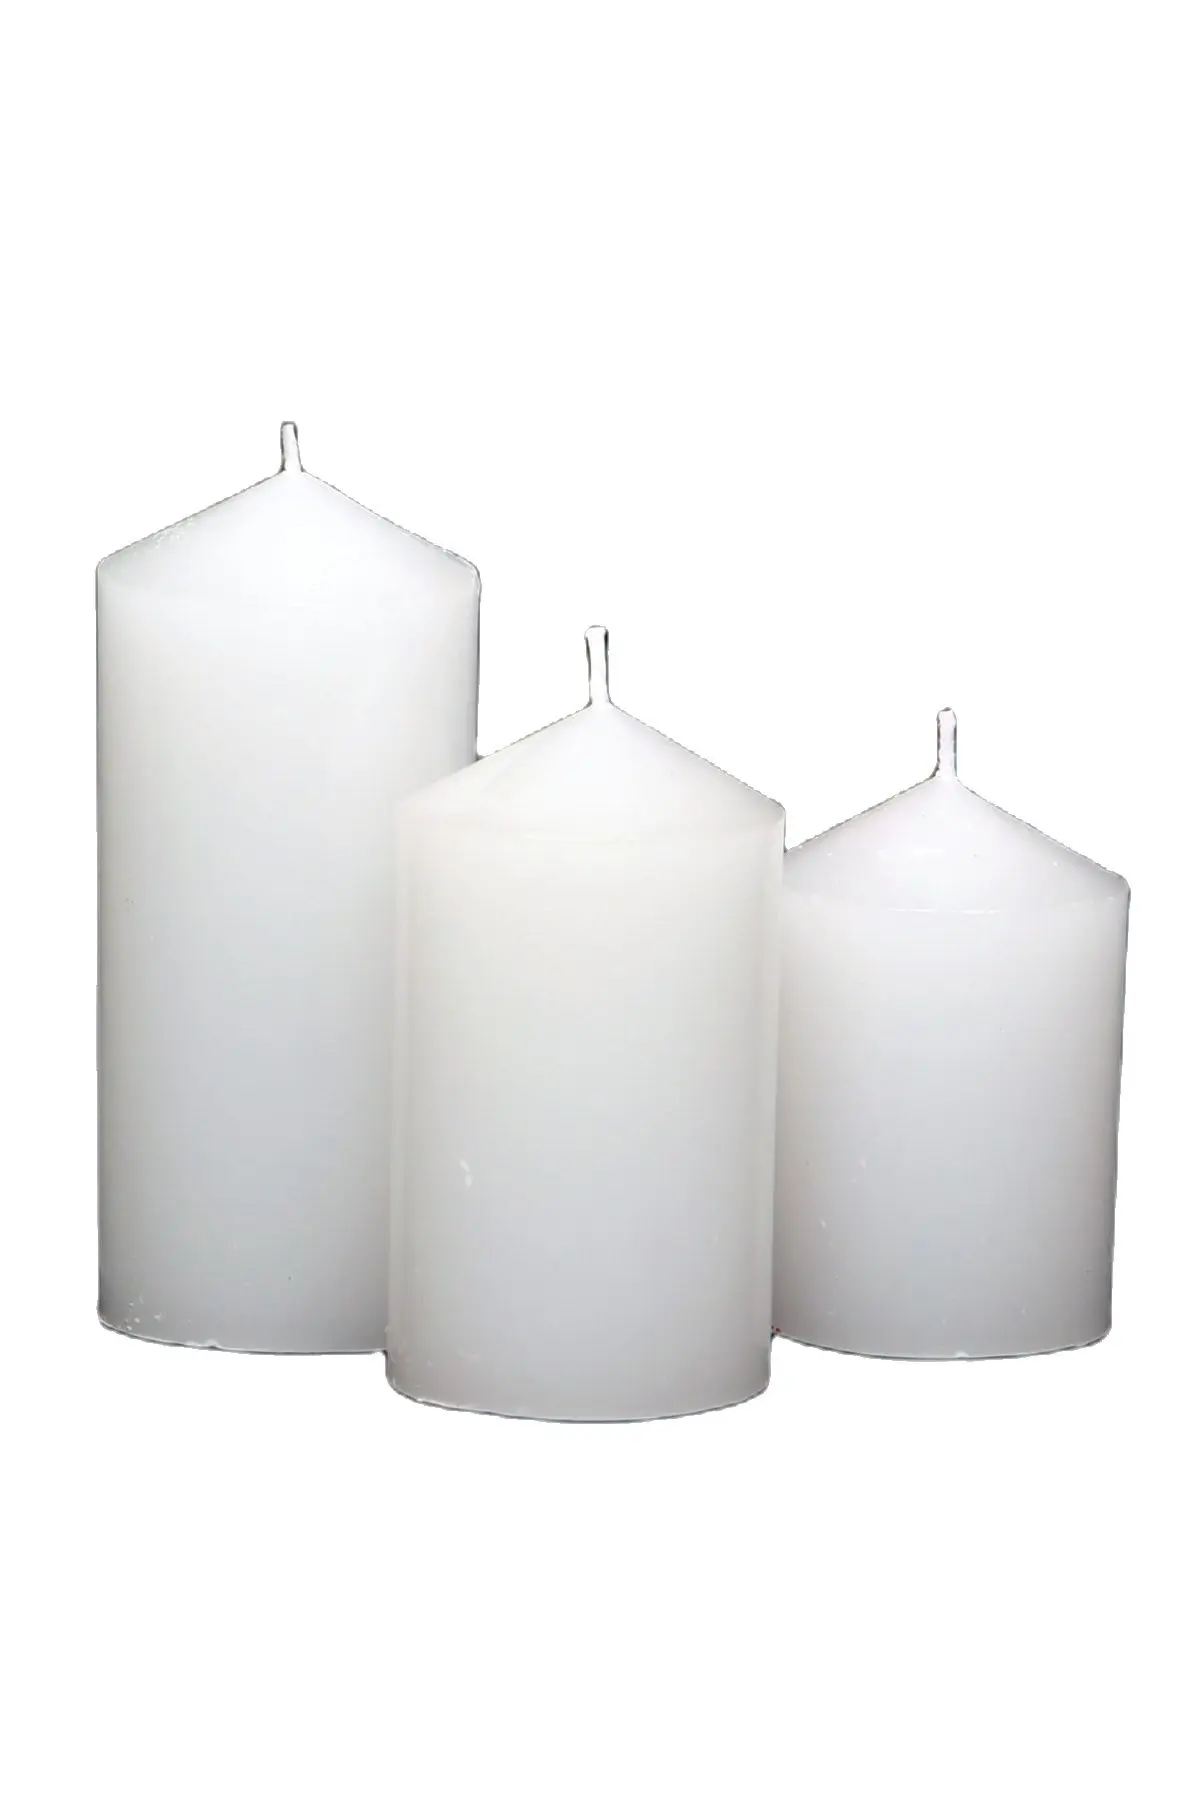 3 Pieces White Cylinder Candle with Powder Scented Accessory Decoration Holder Wick Stylish Design Candles